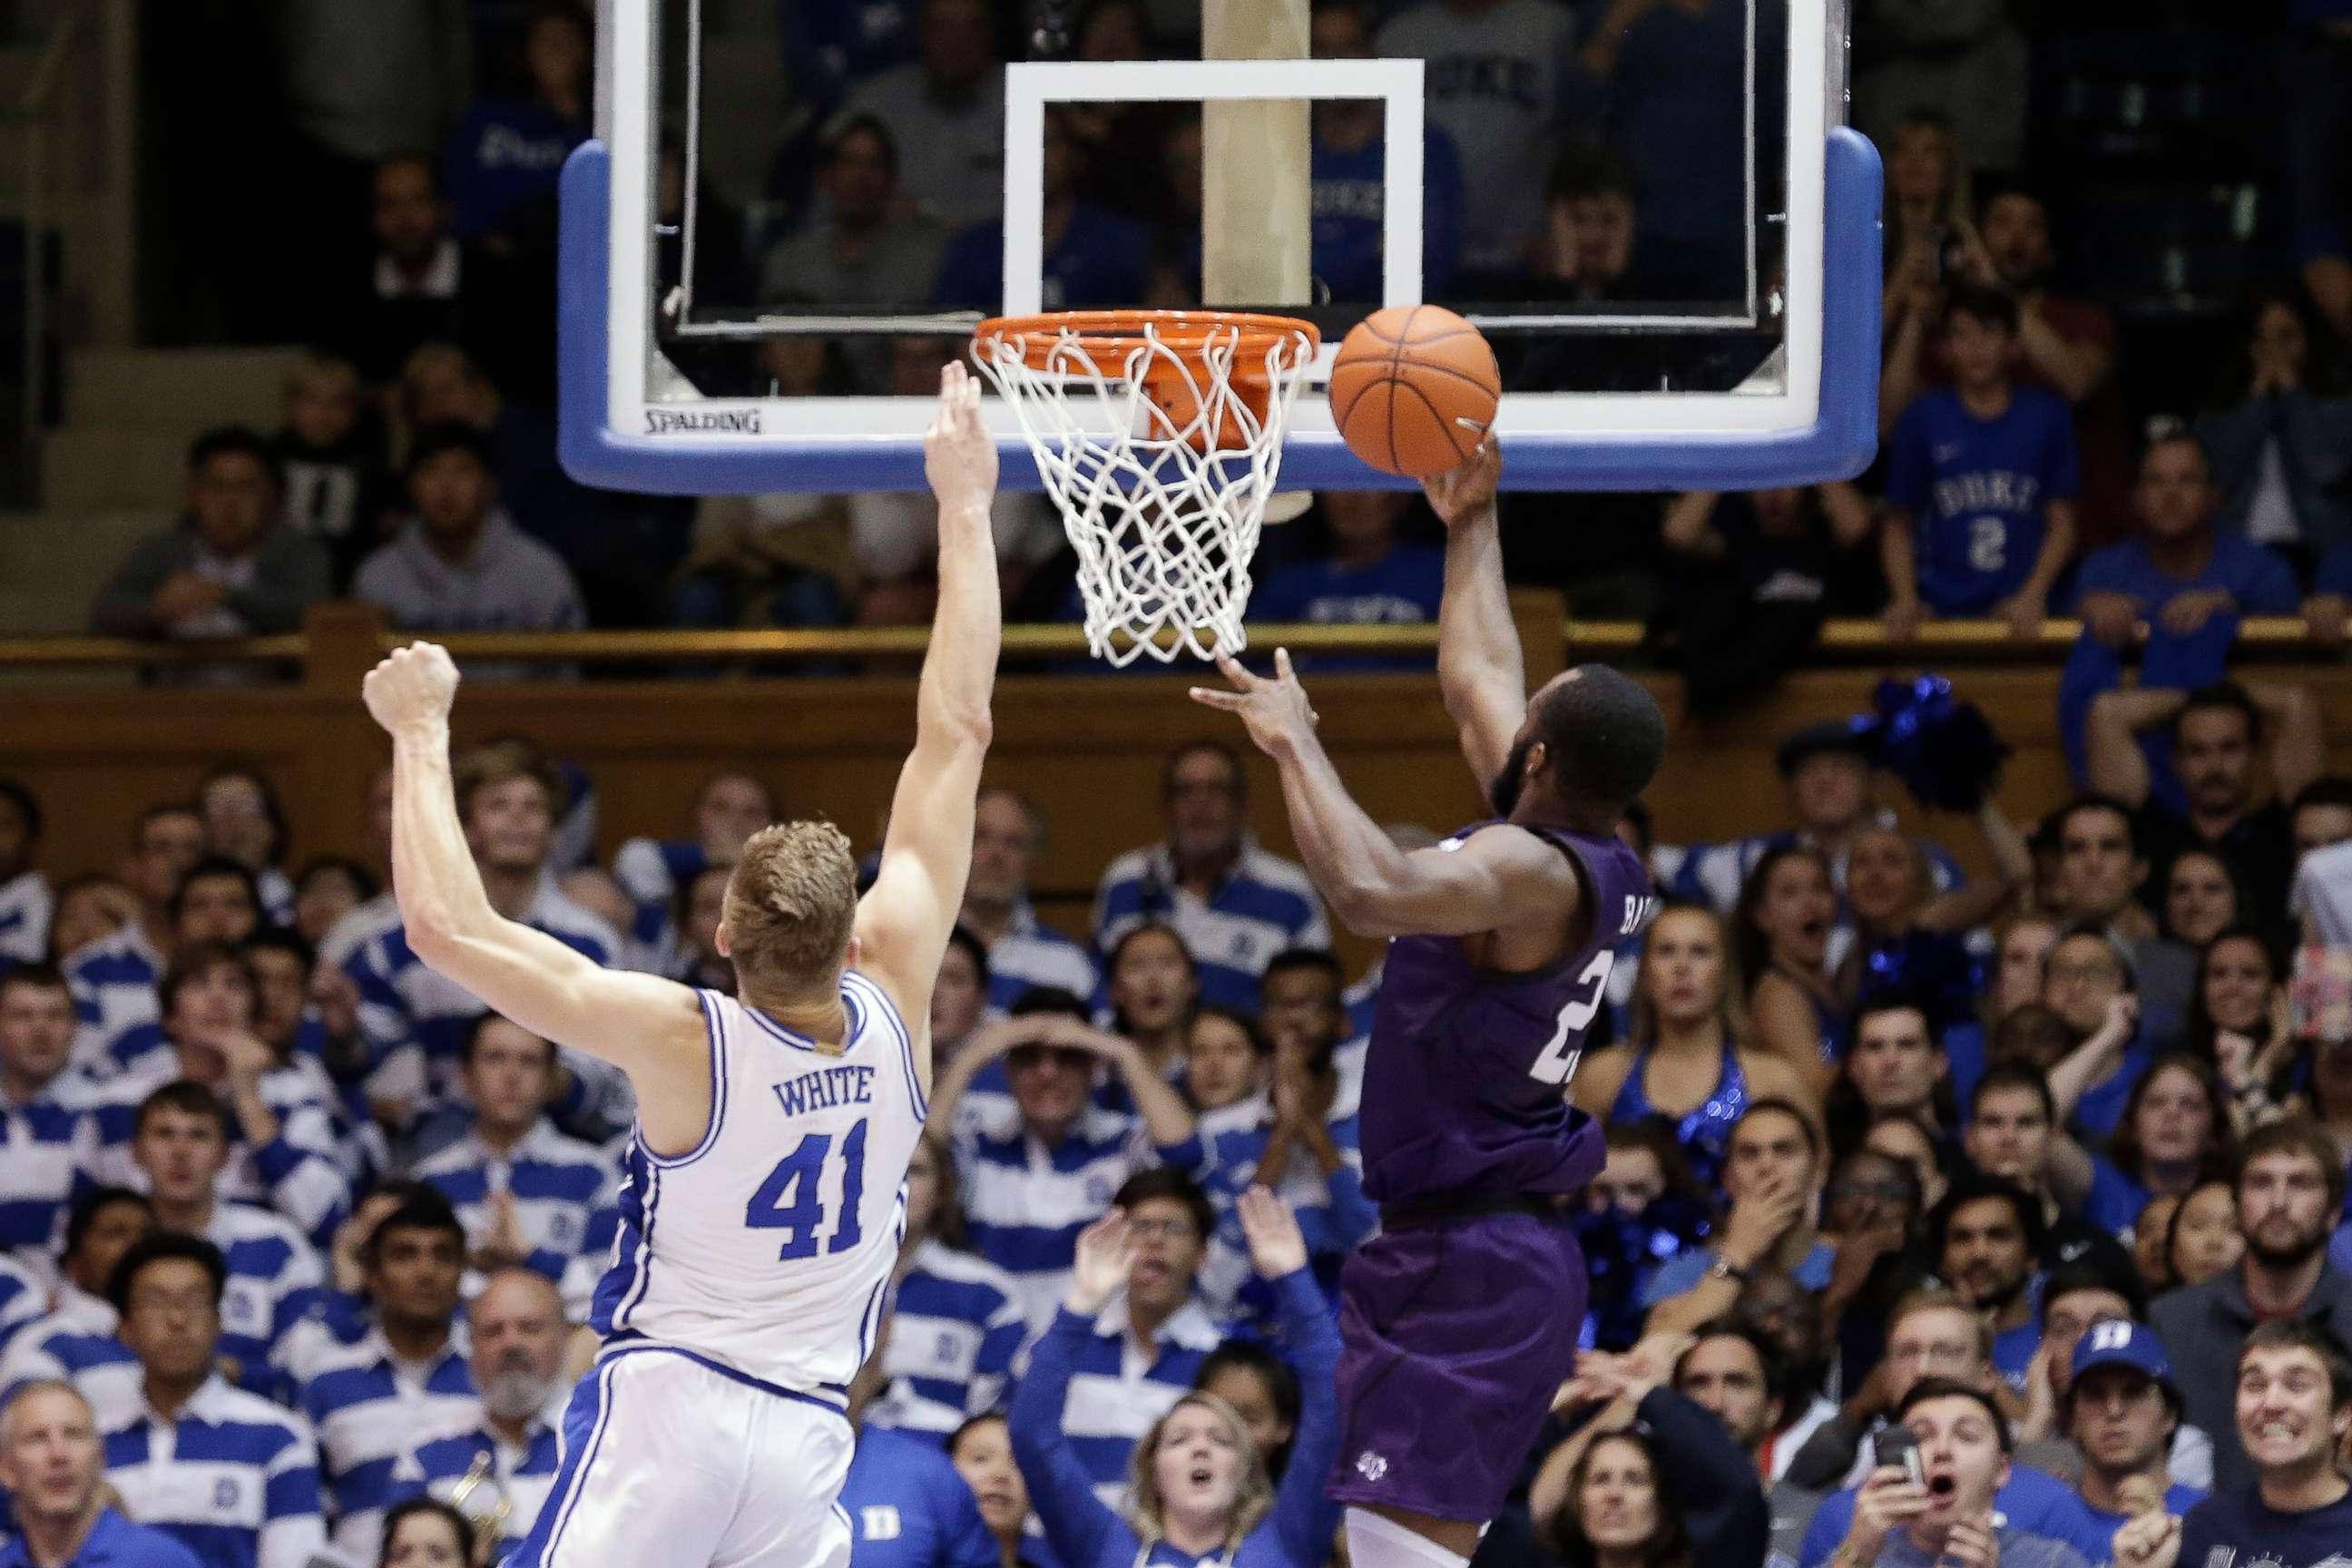 PHOTO: Stephen F. Austin forward Nathan Bain drives for a game-winning basket over Duke forward Jack White during overtime in an NCAA college basketball game in Durham, N.C., Tuesday, Nov. 26, 2019. 